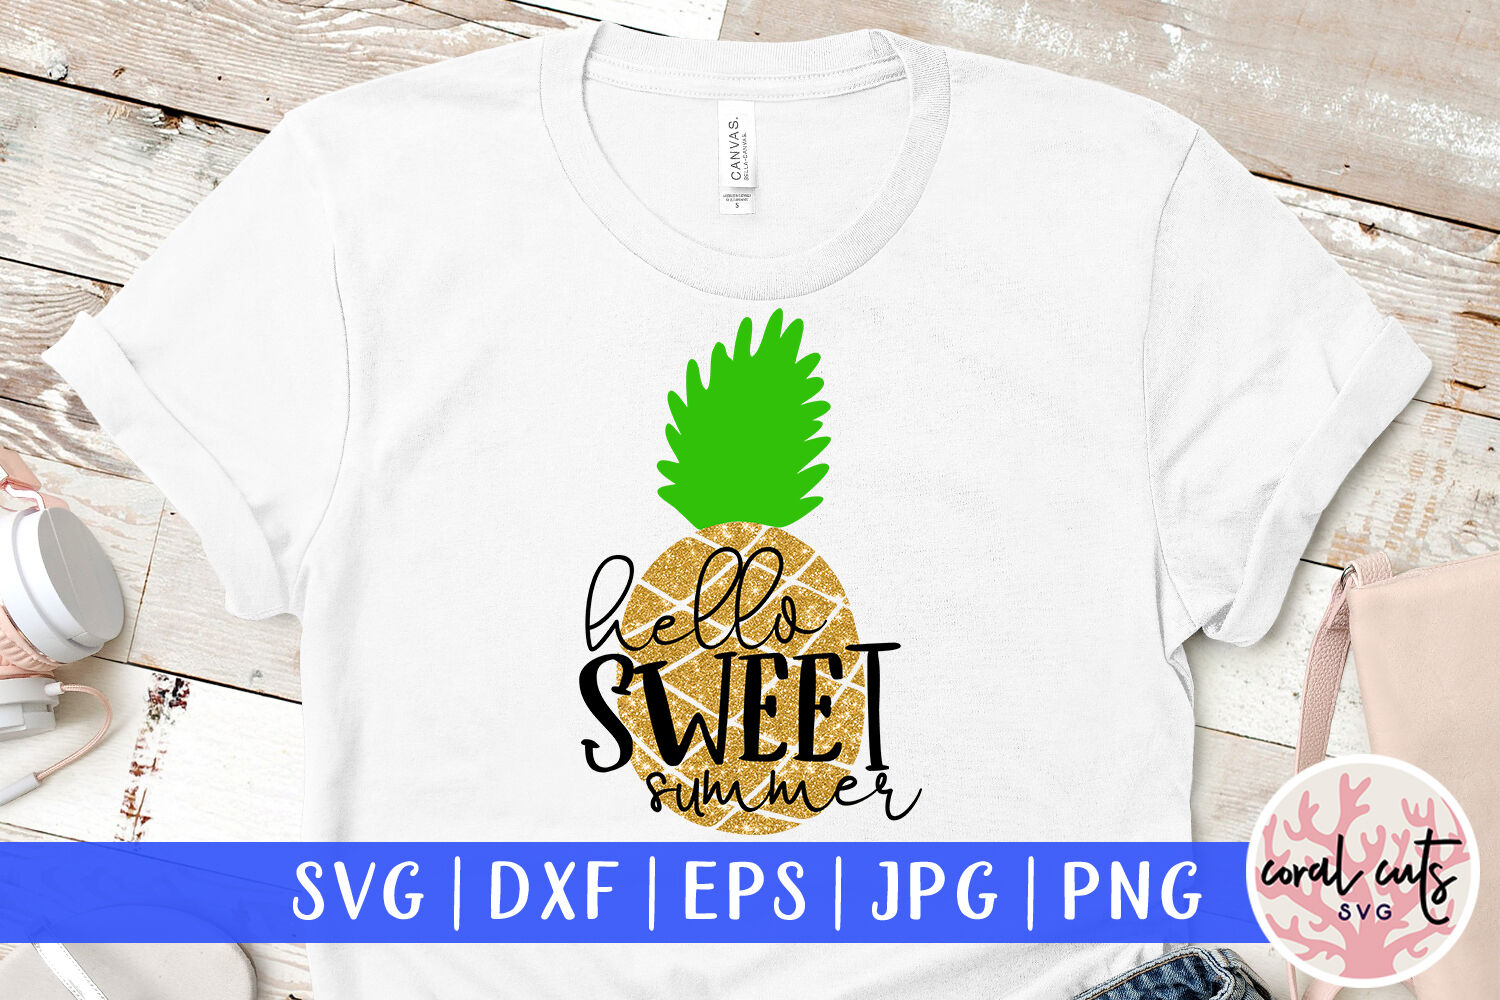 Download Hello sweet summer - Summer SVG EPS DXF PNG Cut File By ...